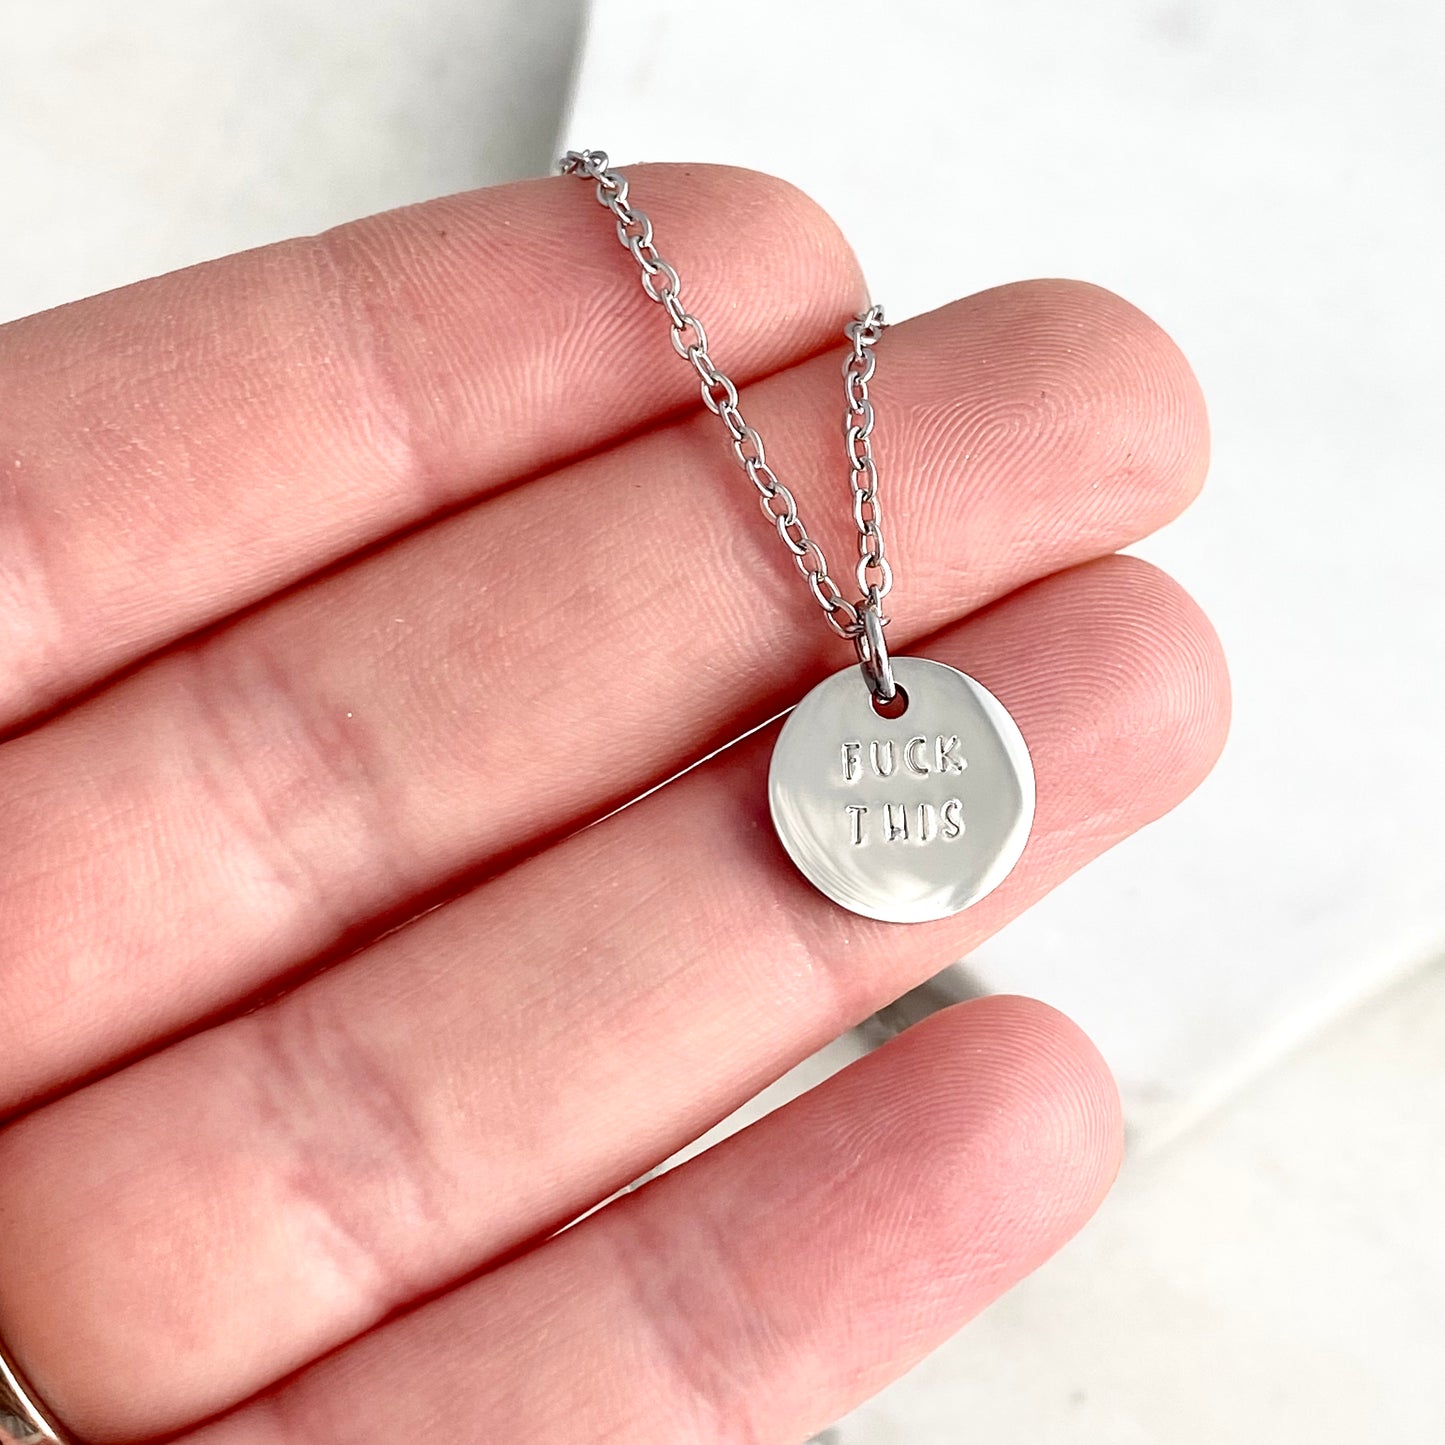 Fuck This / Fuck That, Reversible Hand Stamped Coin Necklace